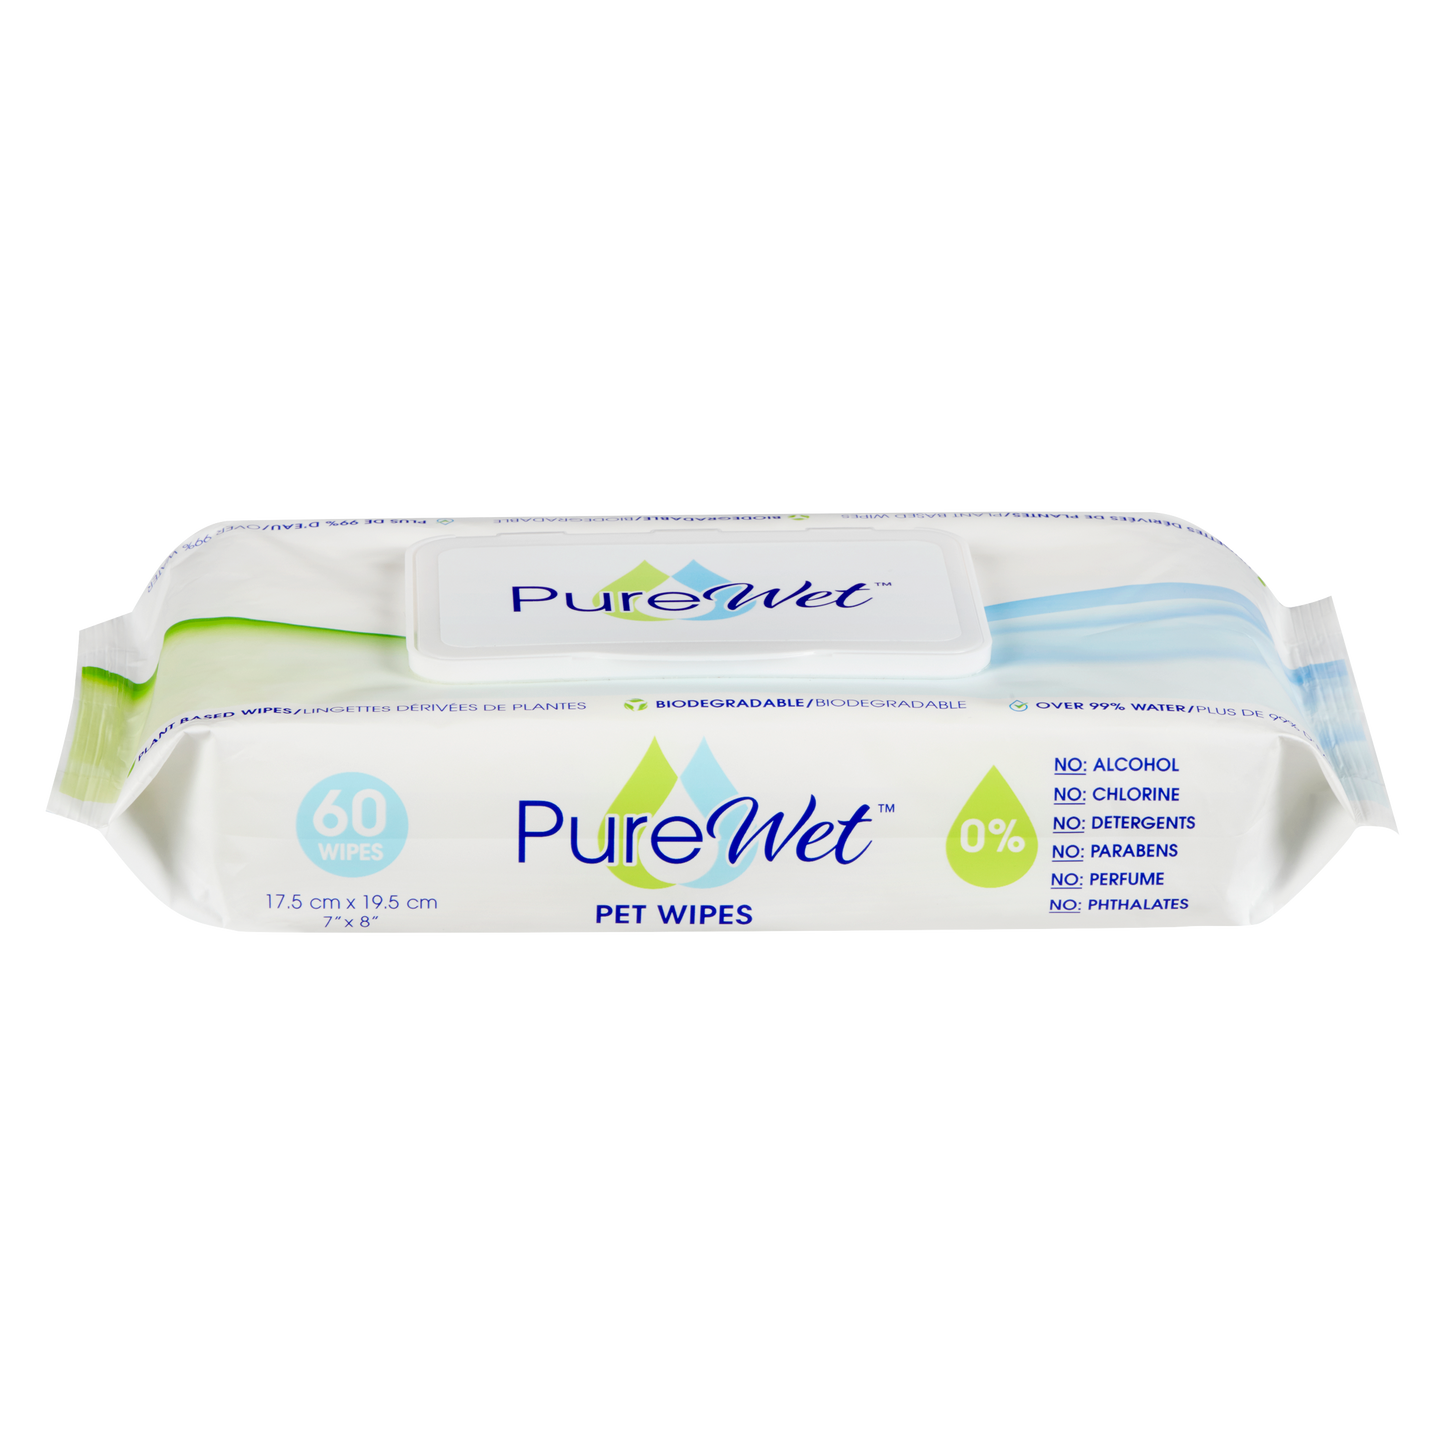 PureWet Biodegradable Wipes - 60 ct.